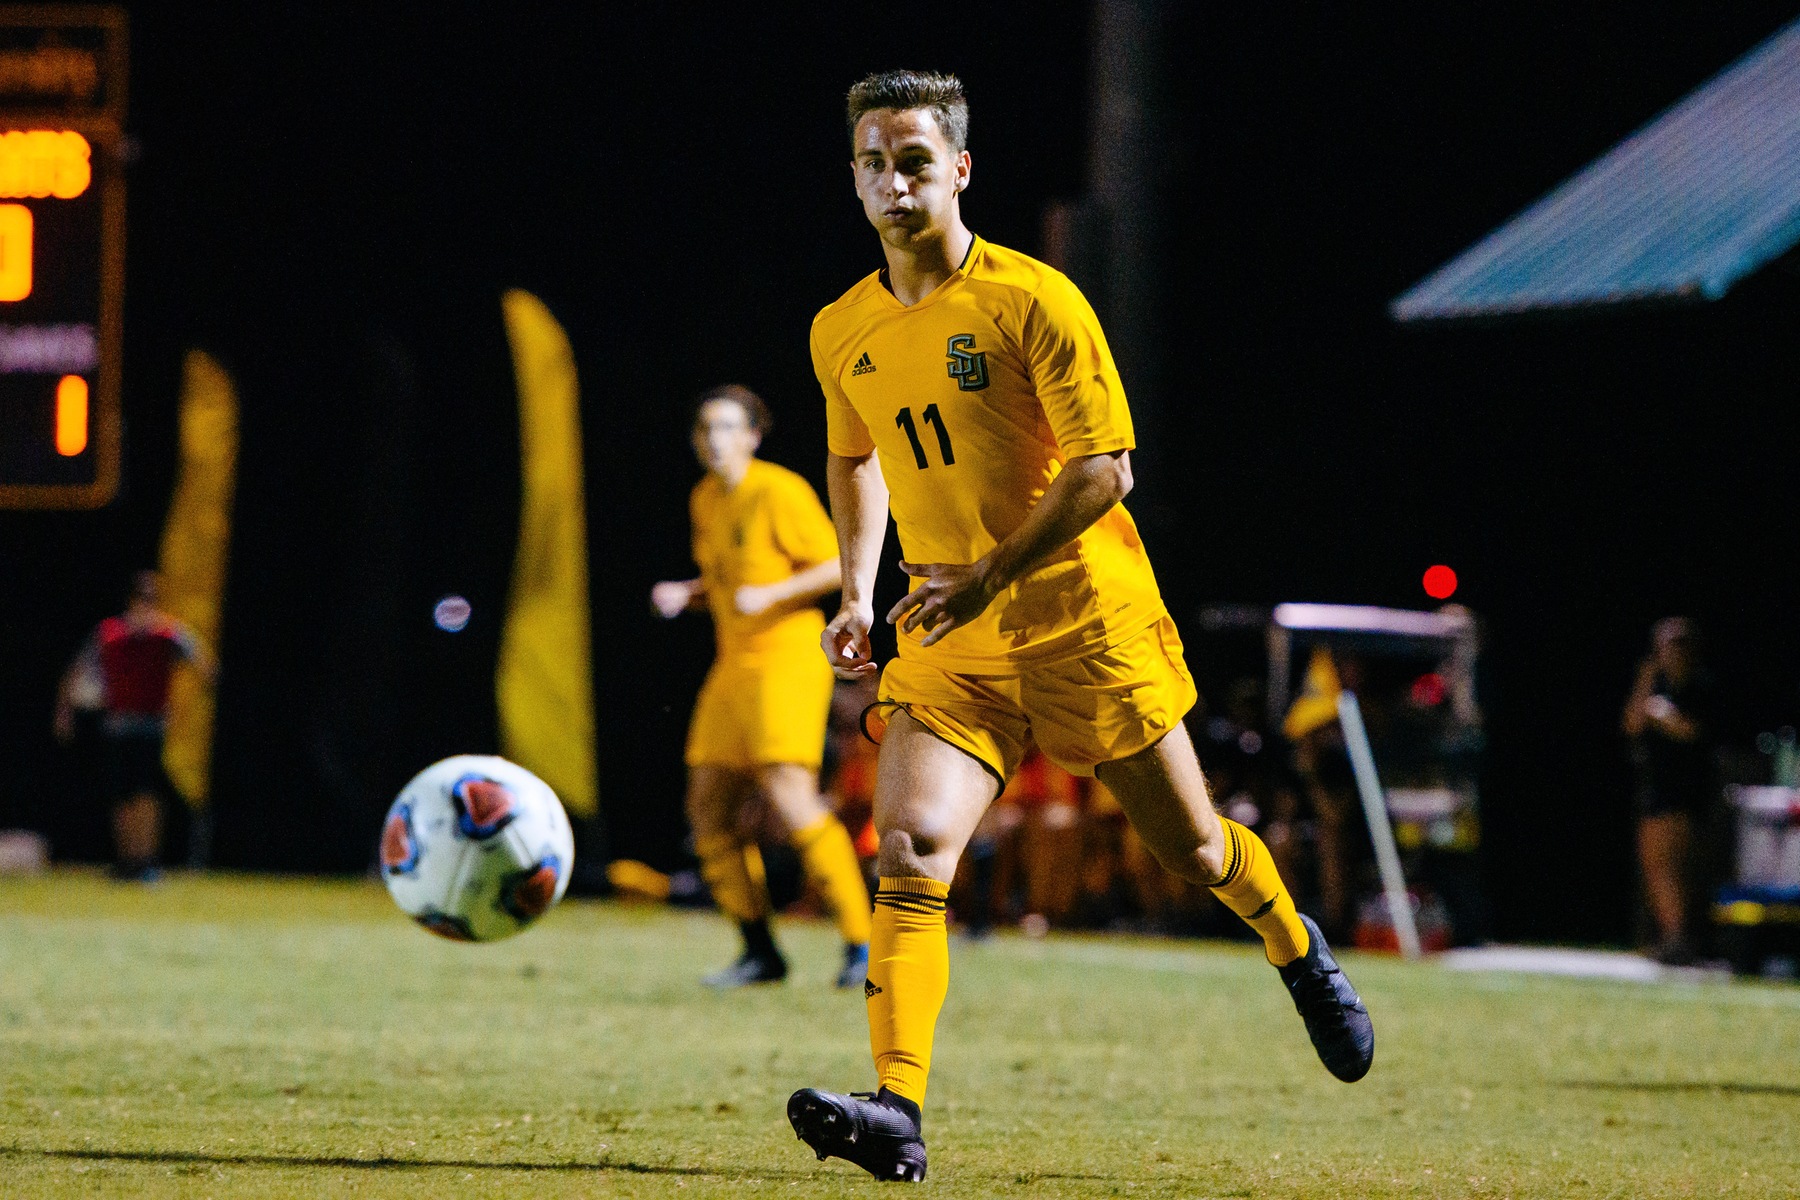 Seth Holzmann's Two Goals and Assist Leads Men's Soccer Past Colorado College